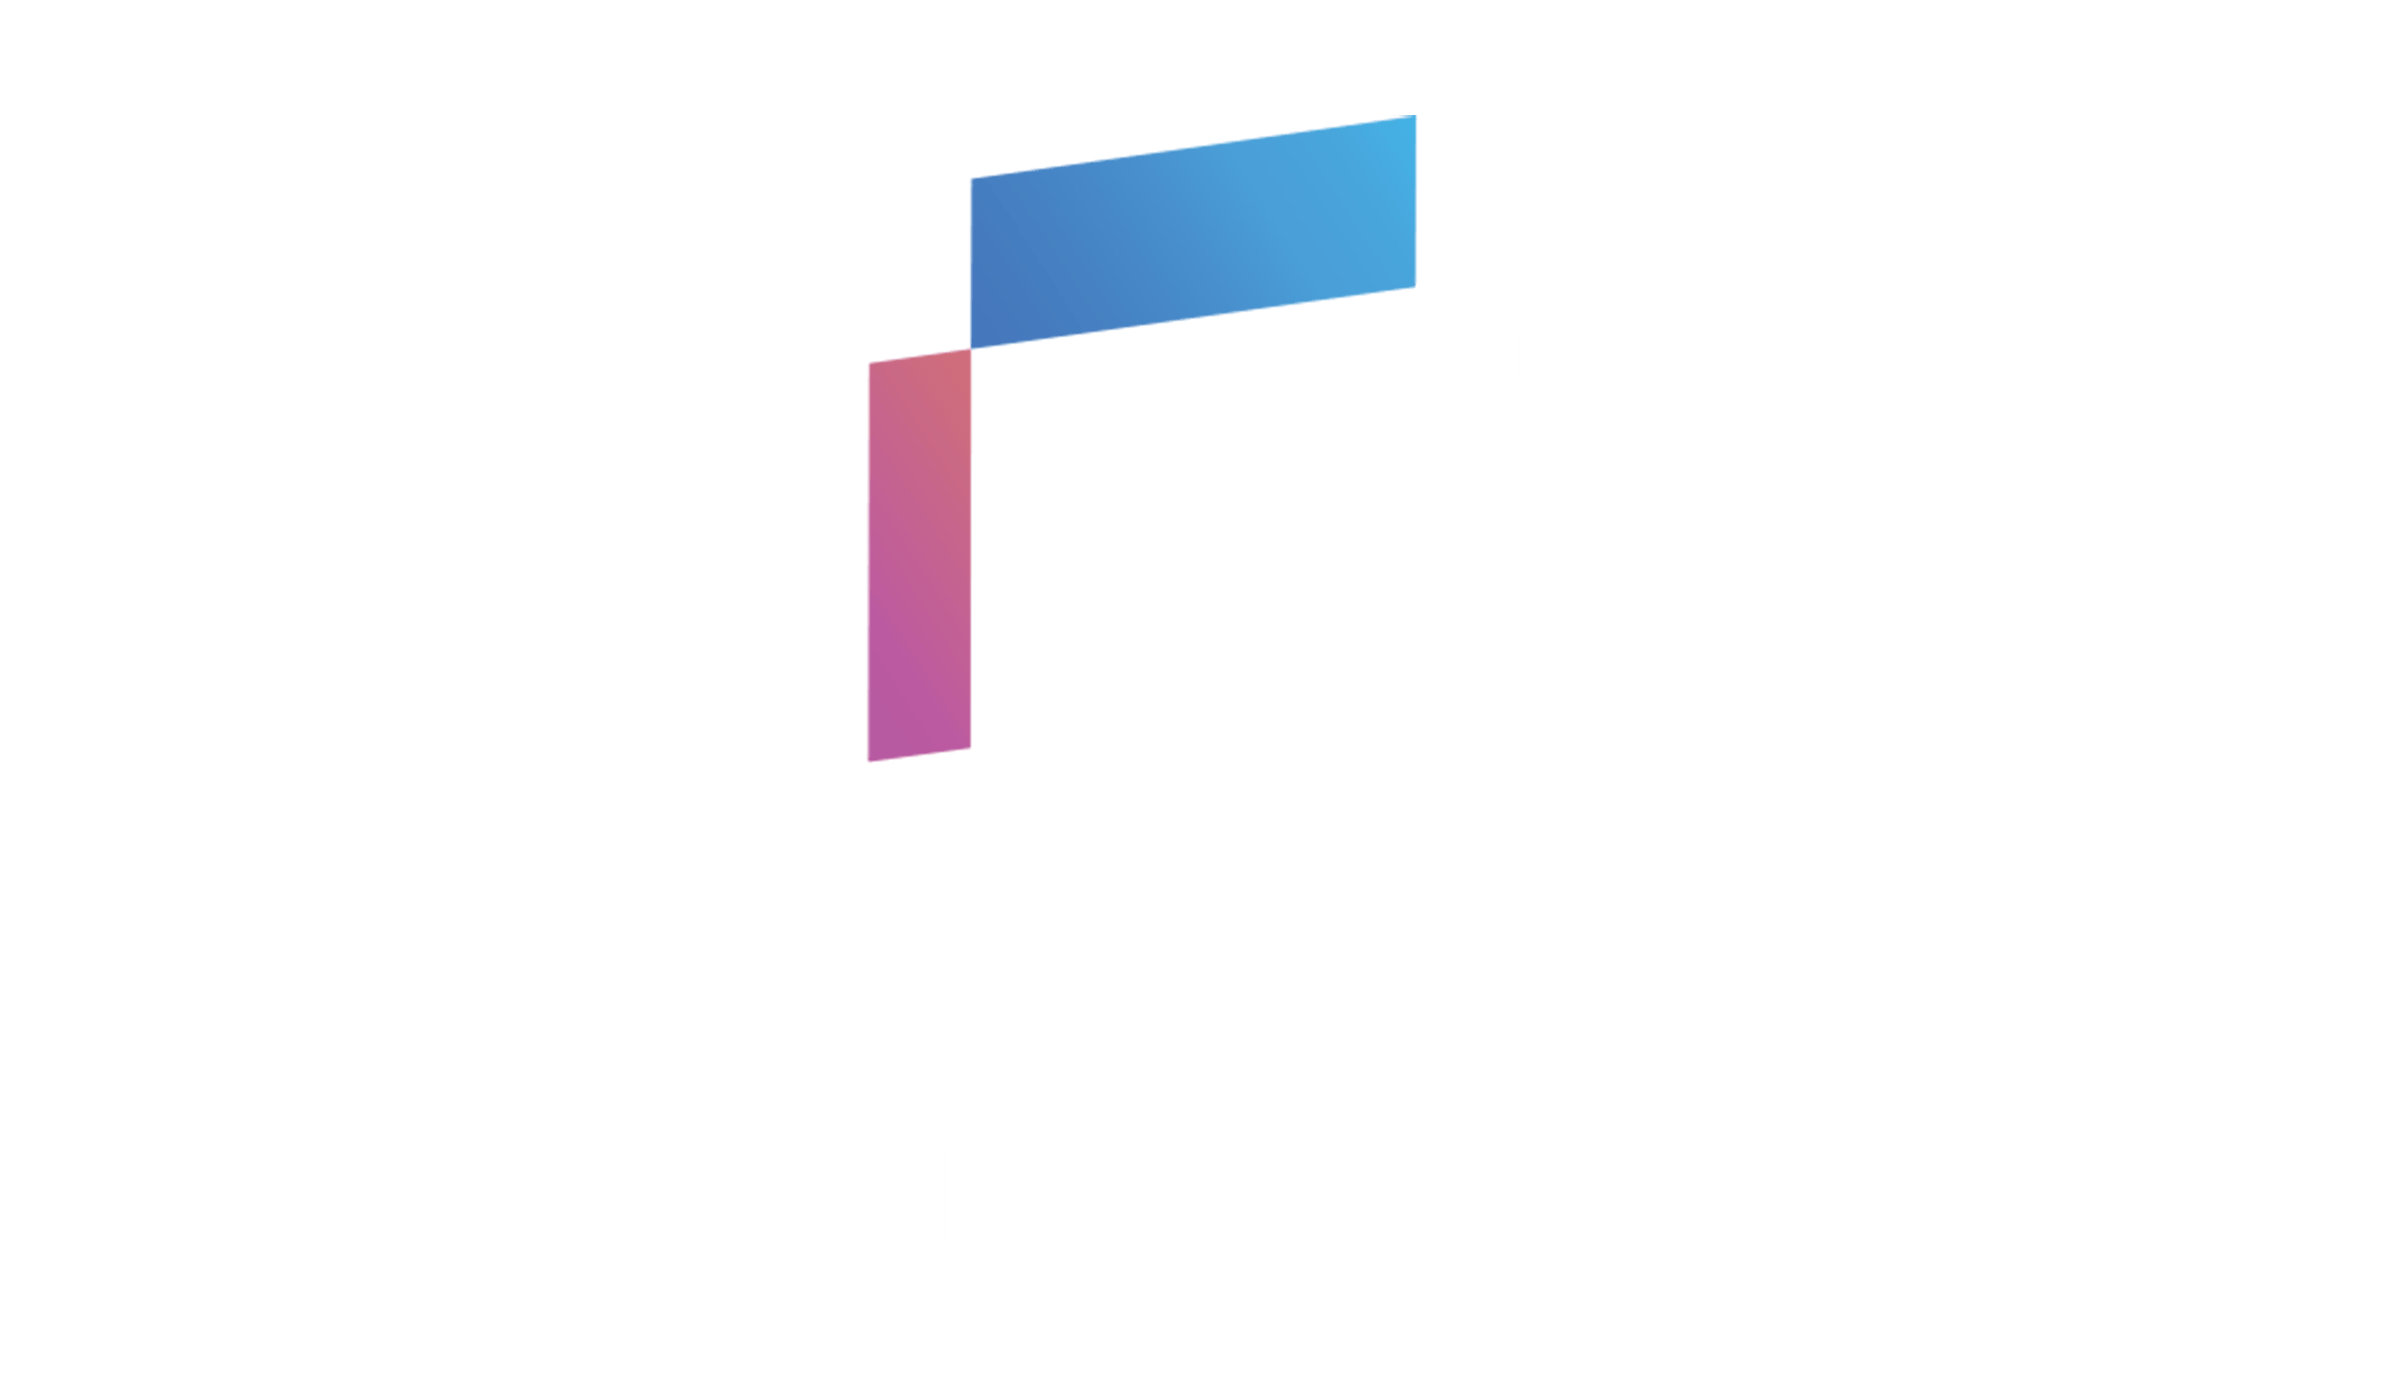 Allpha store